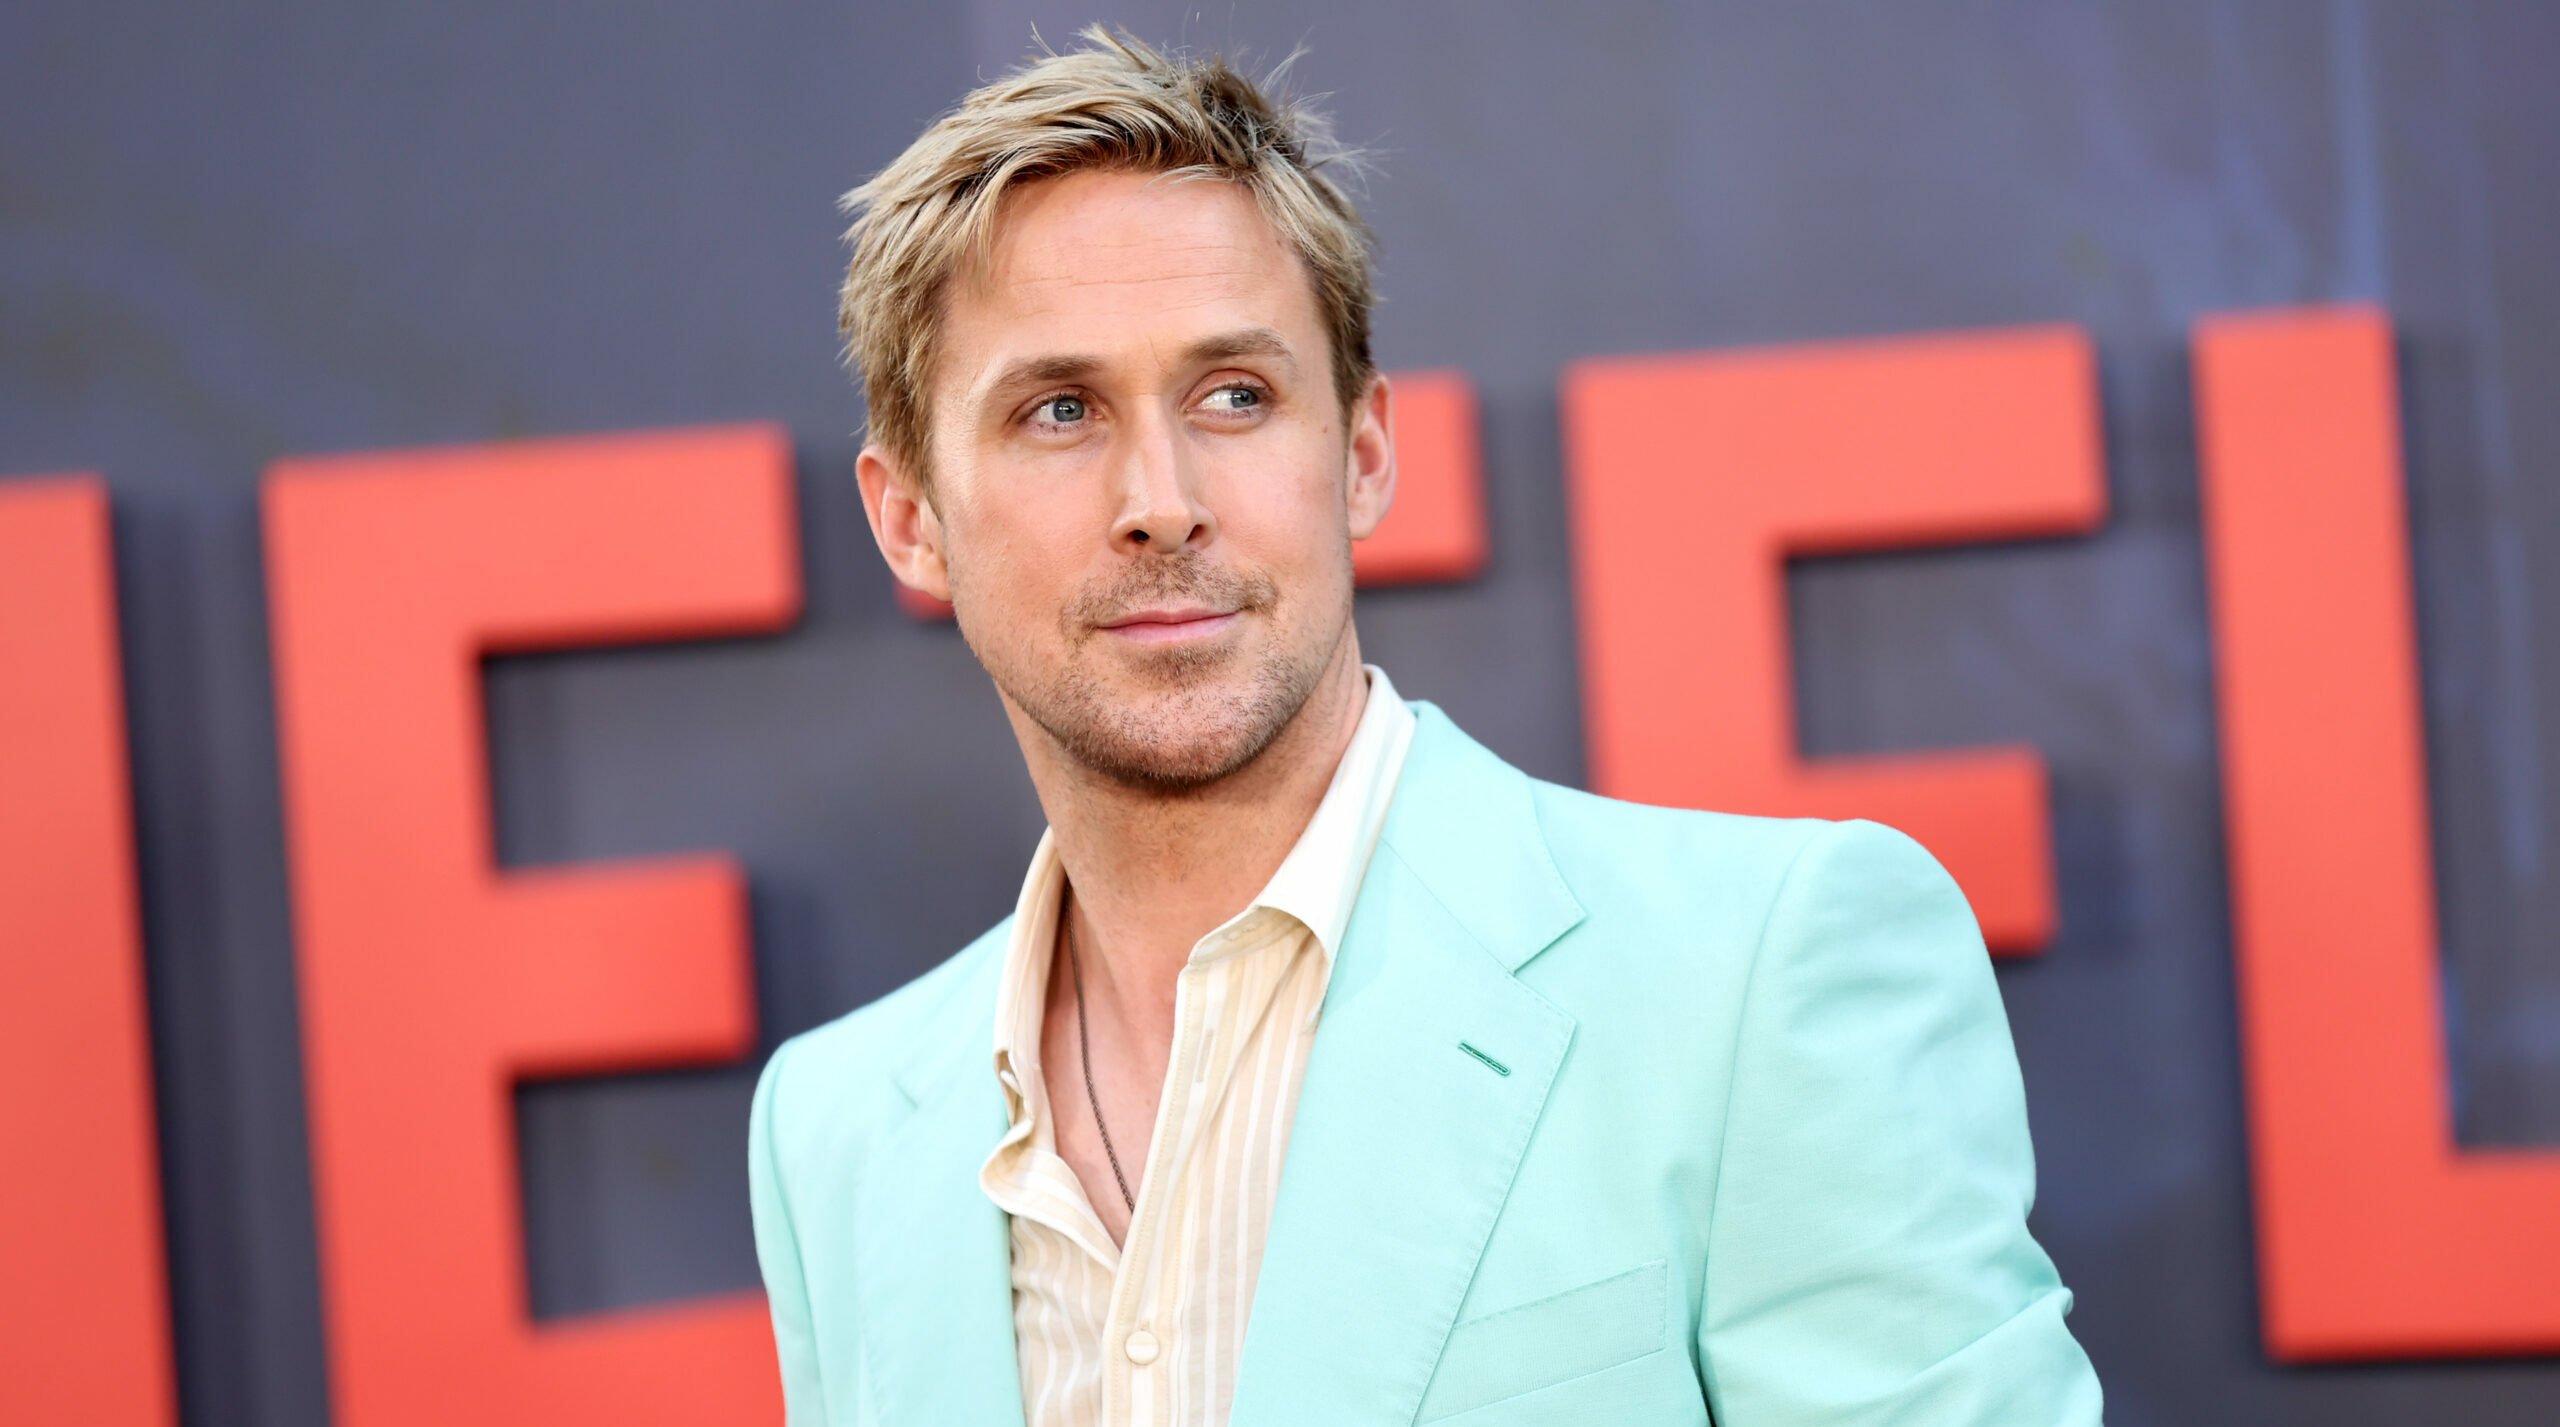 Ryan Gosling Says Eva Mendes Is a Total Doll, Supports His ‘Kenergy'